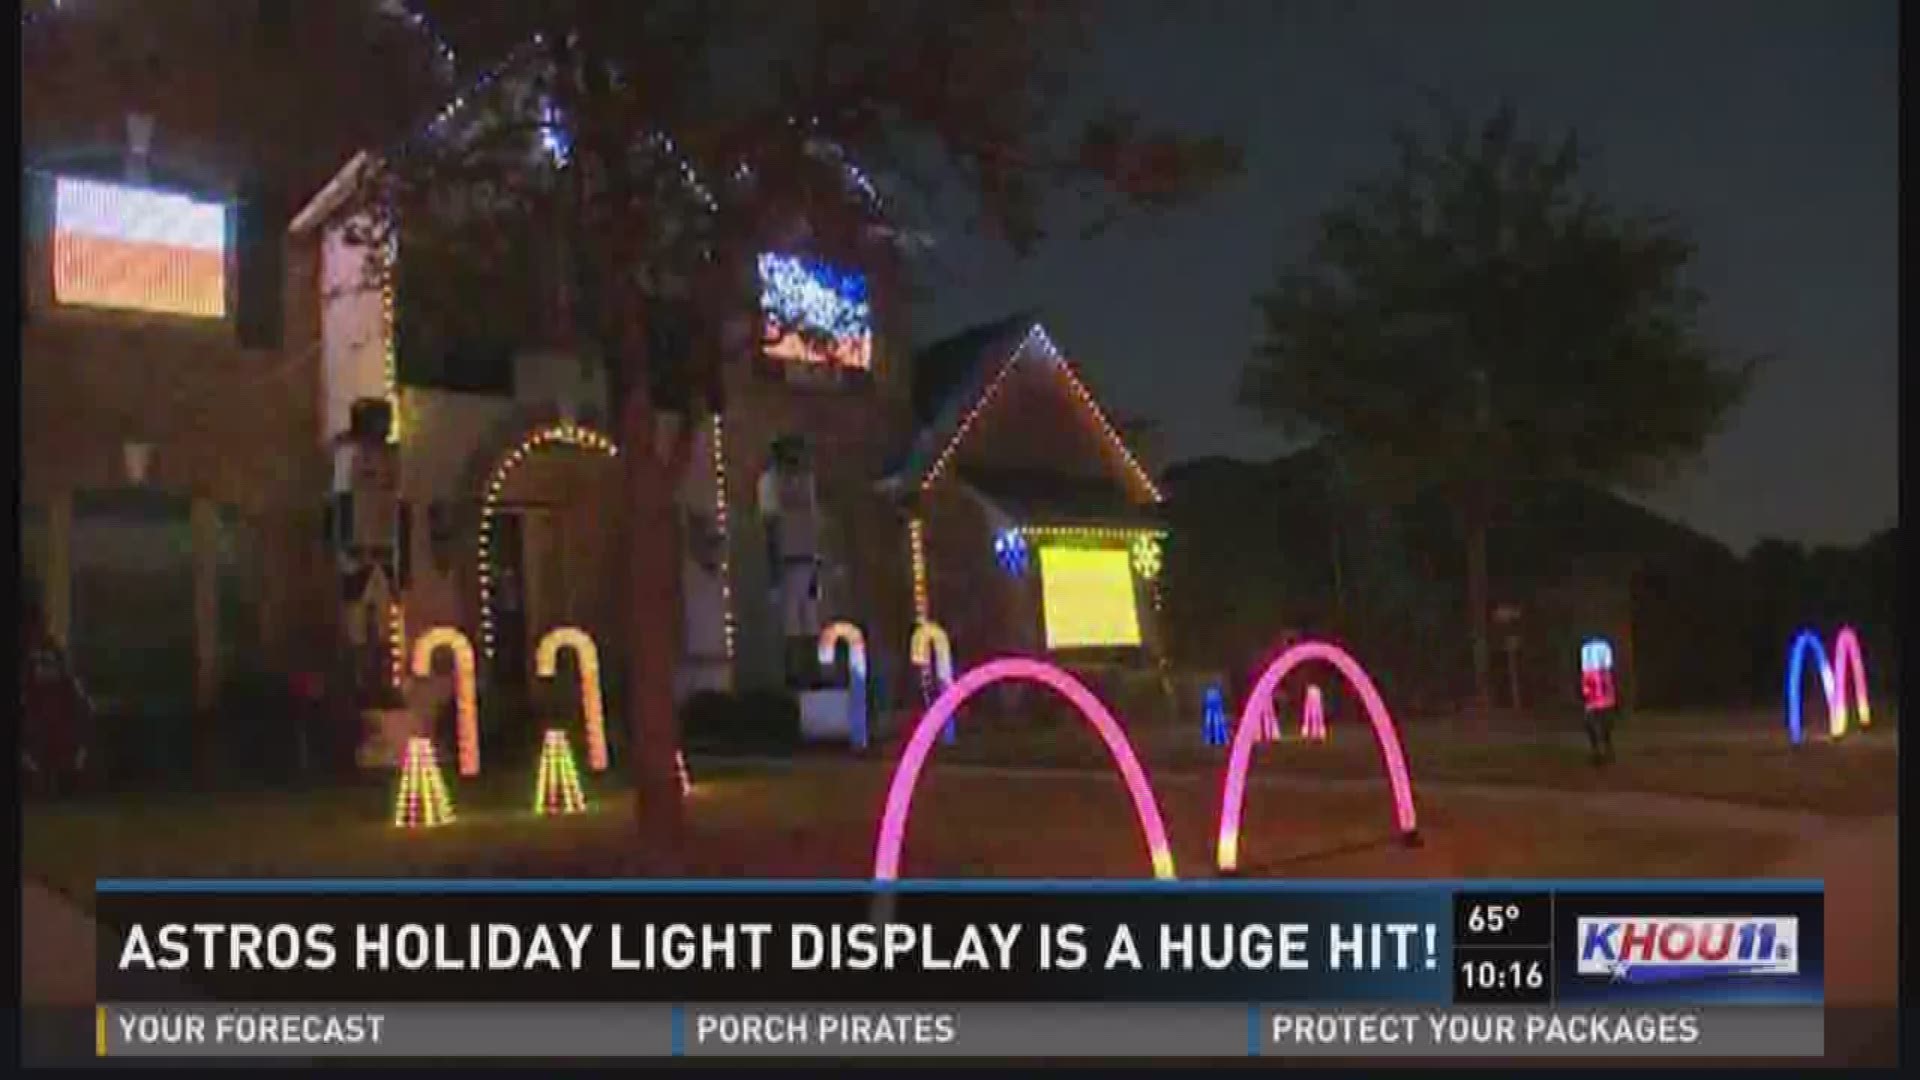 A League City family's Astros lights display is a huge hit in the neighborhood.